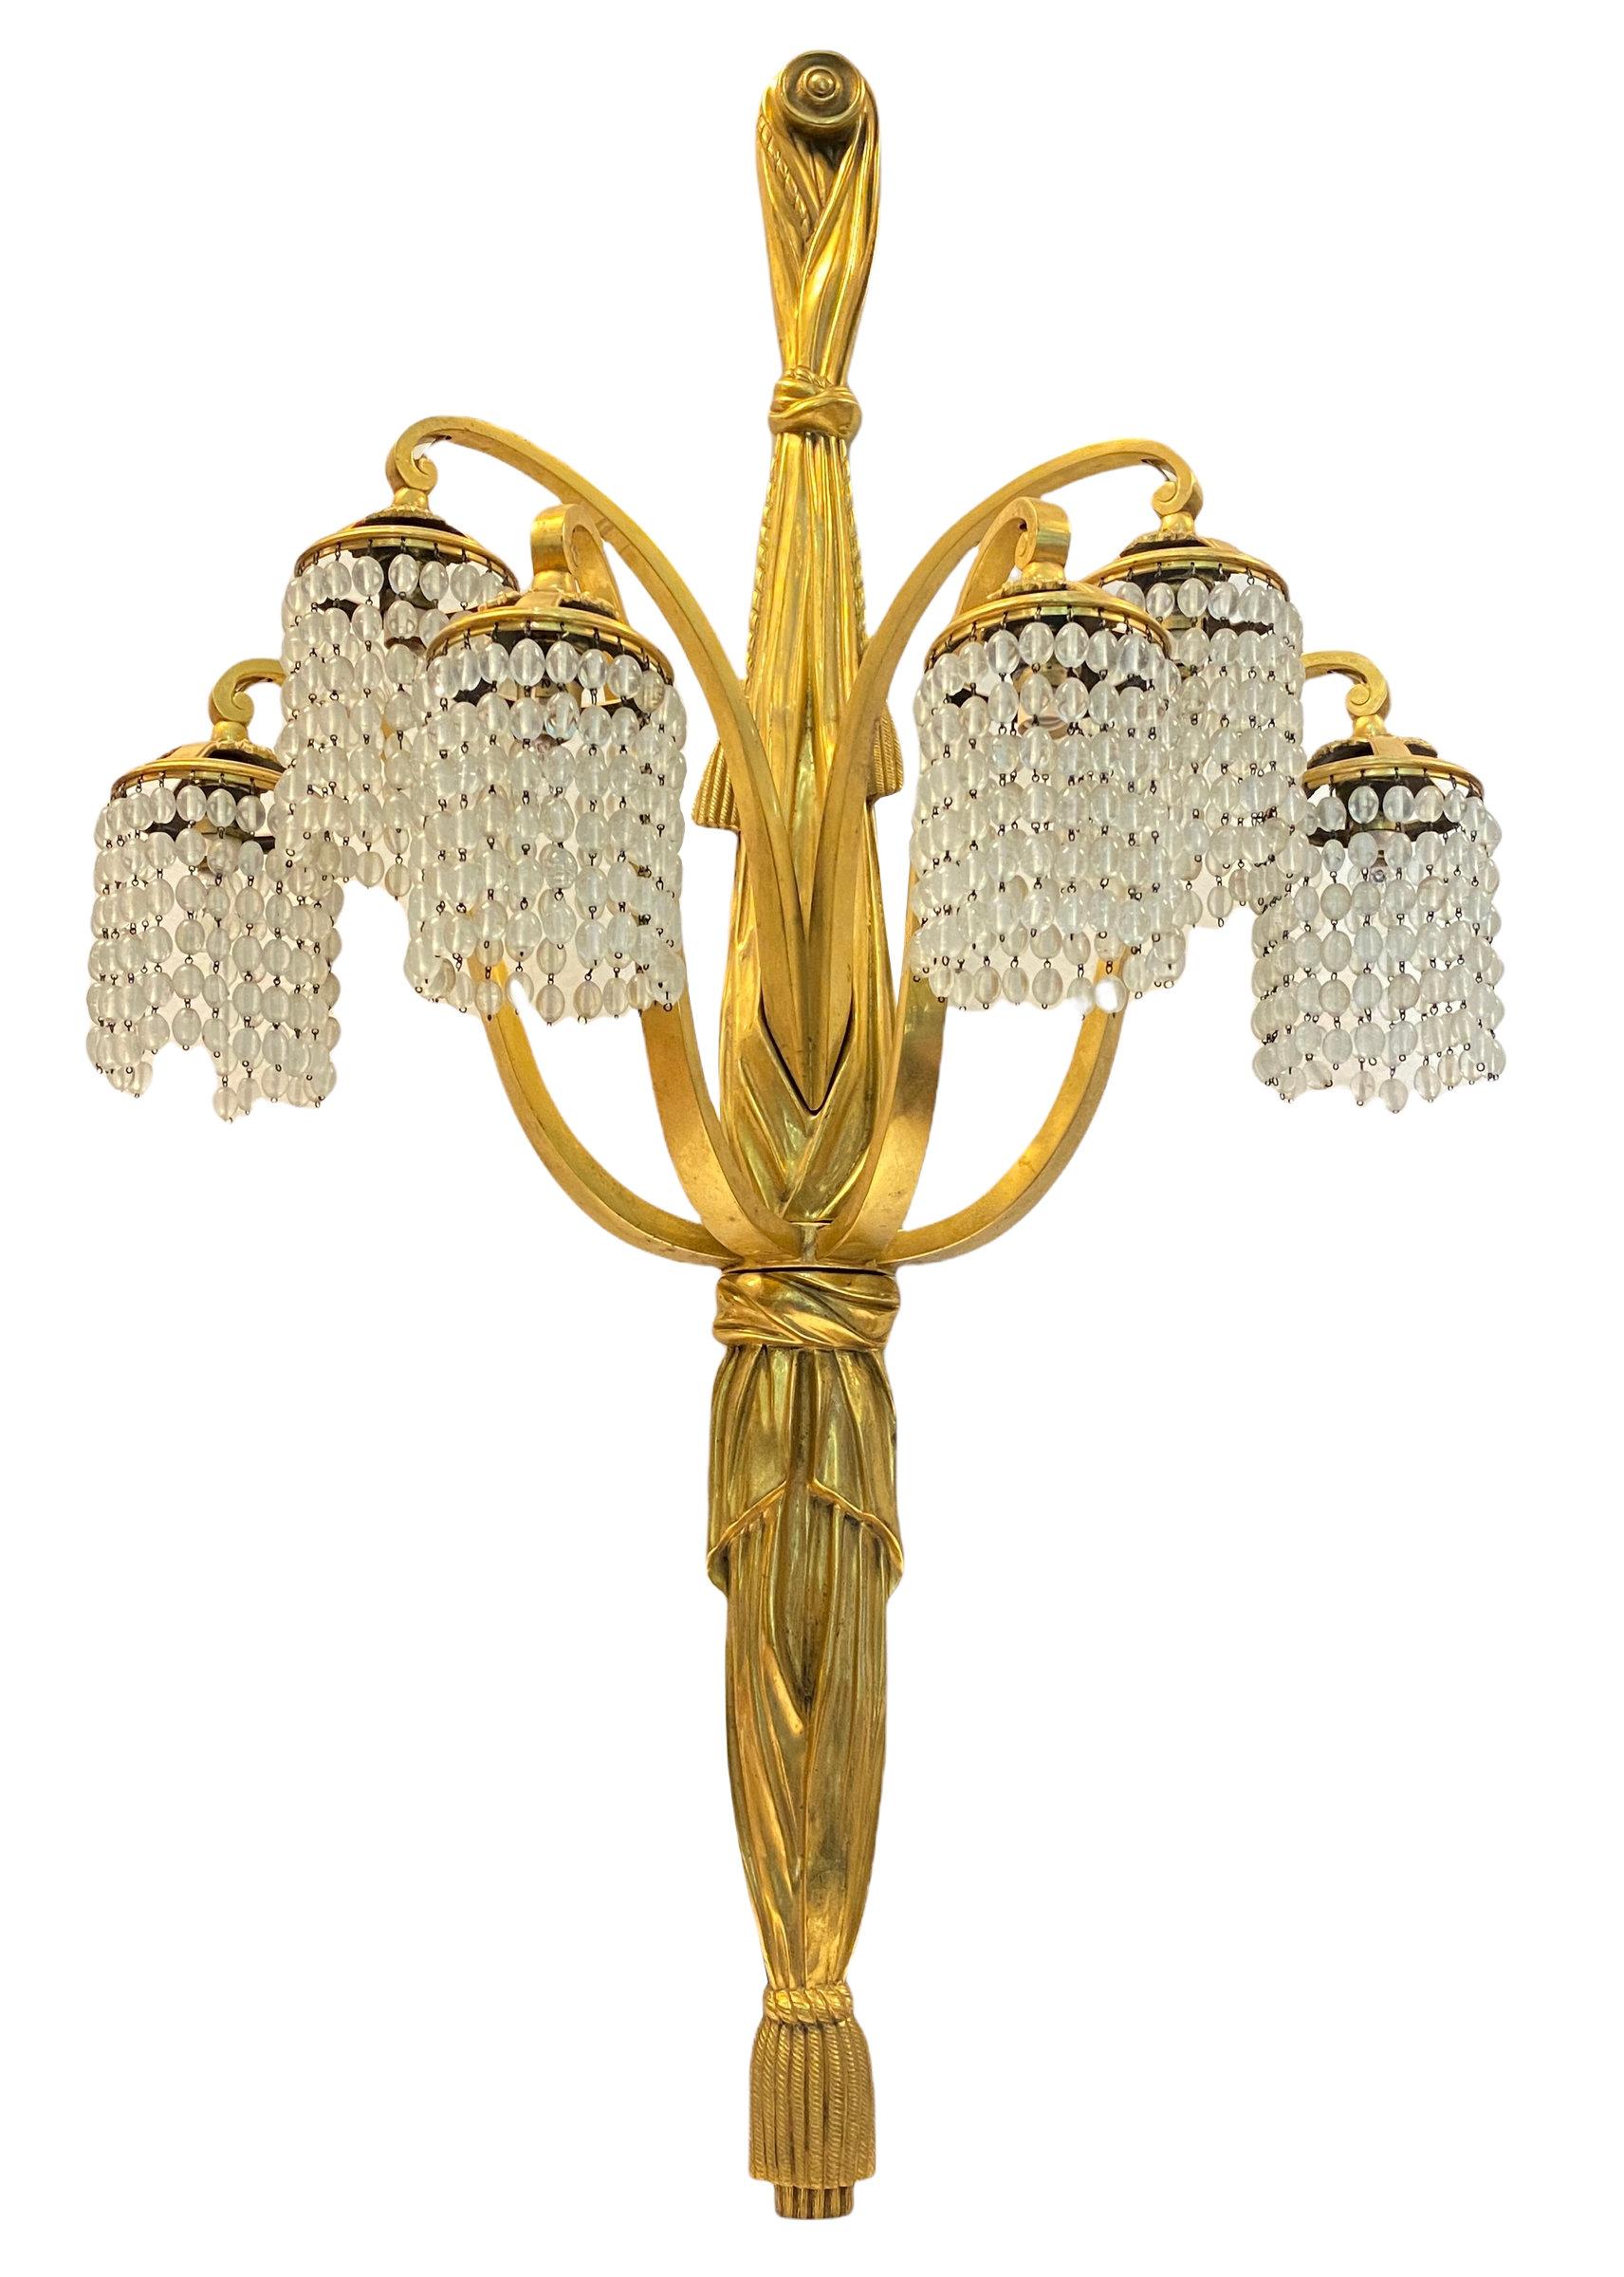 French Art Deco Bronze Sconces Attributed to Louis Süe and André Mare For Sale